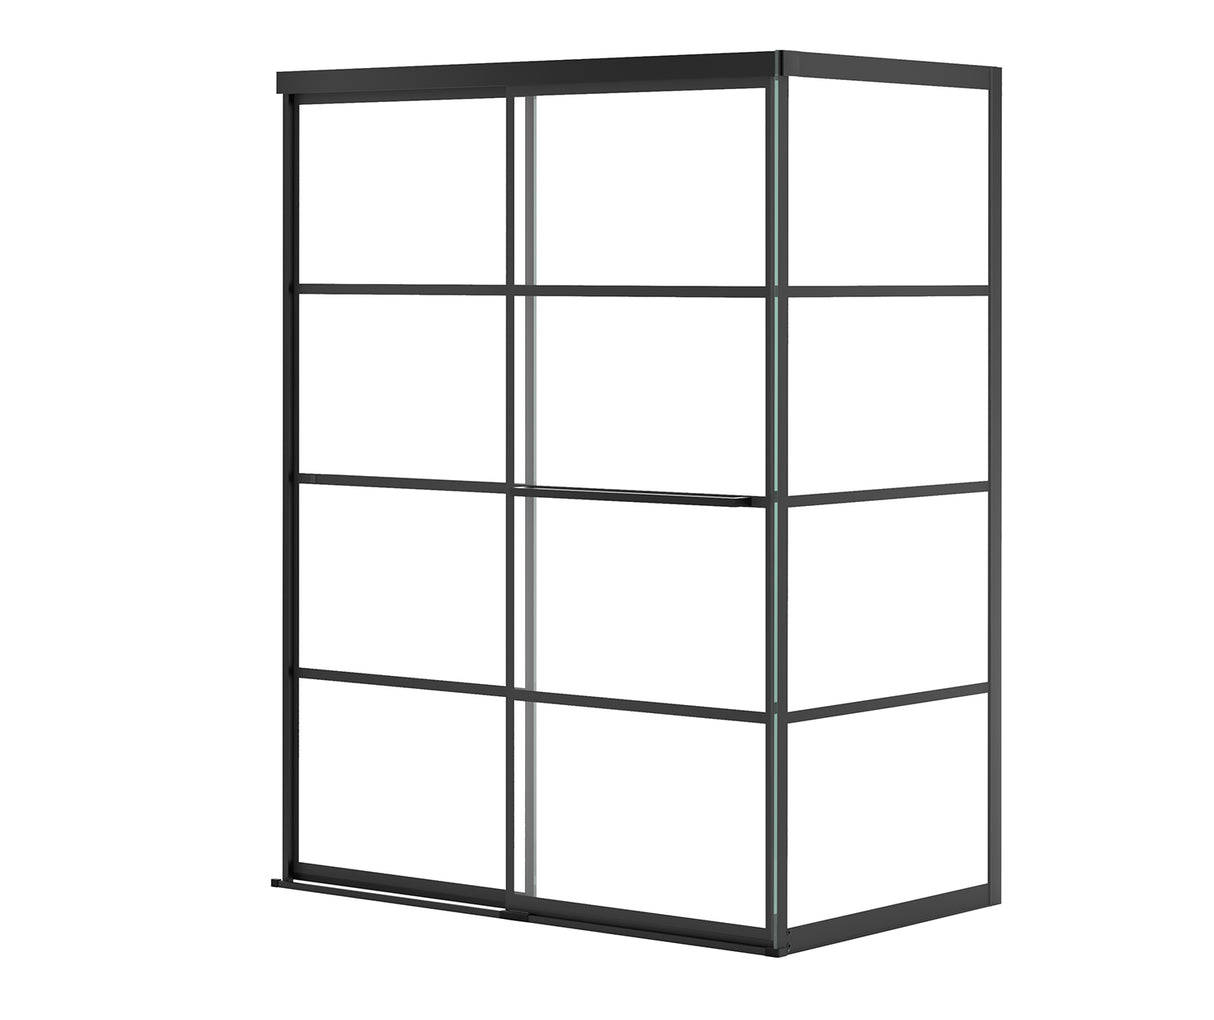 MAAX 136561-972-340-000 Incognito 76 Return Panel for 36 in. Base with Shaker glass in Matte Black